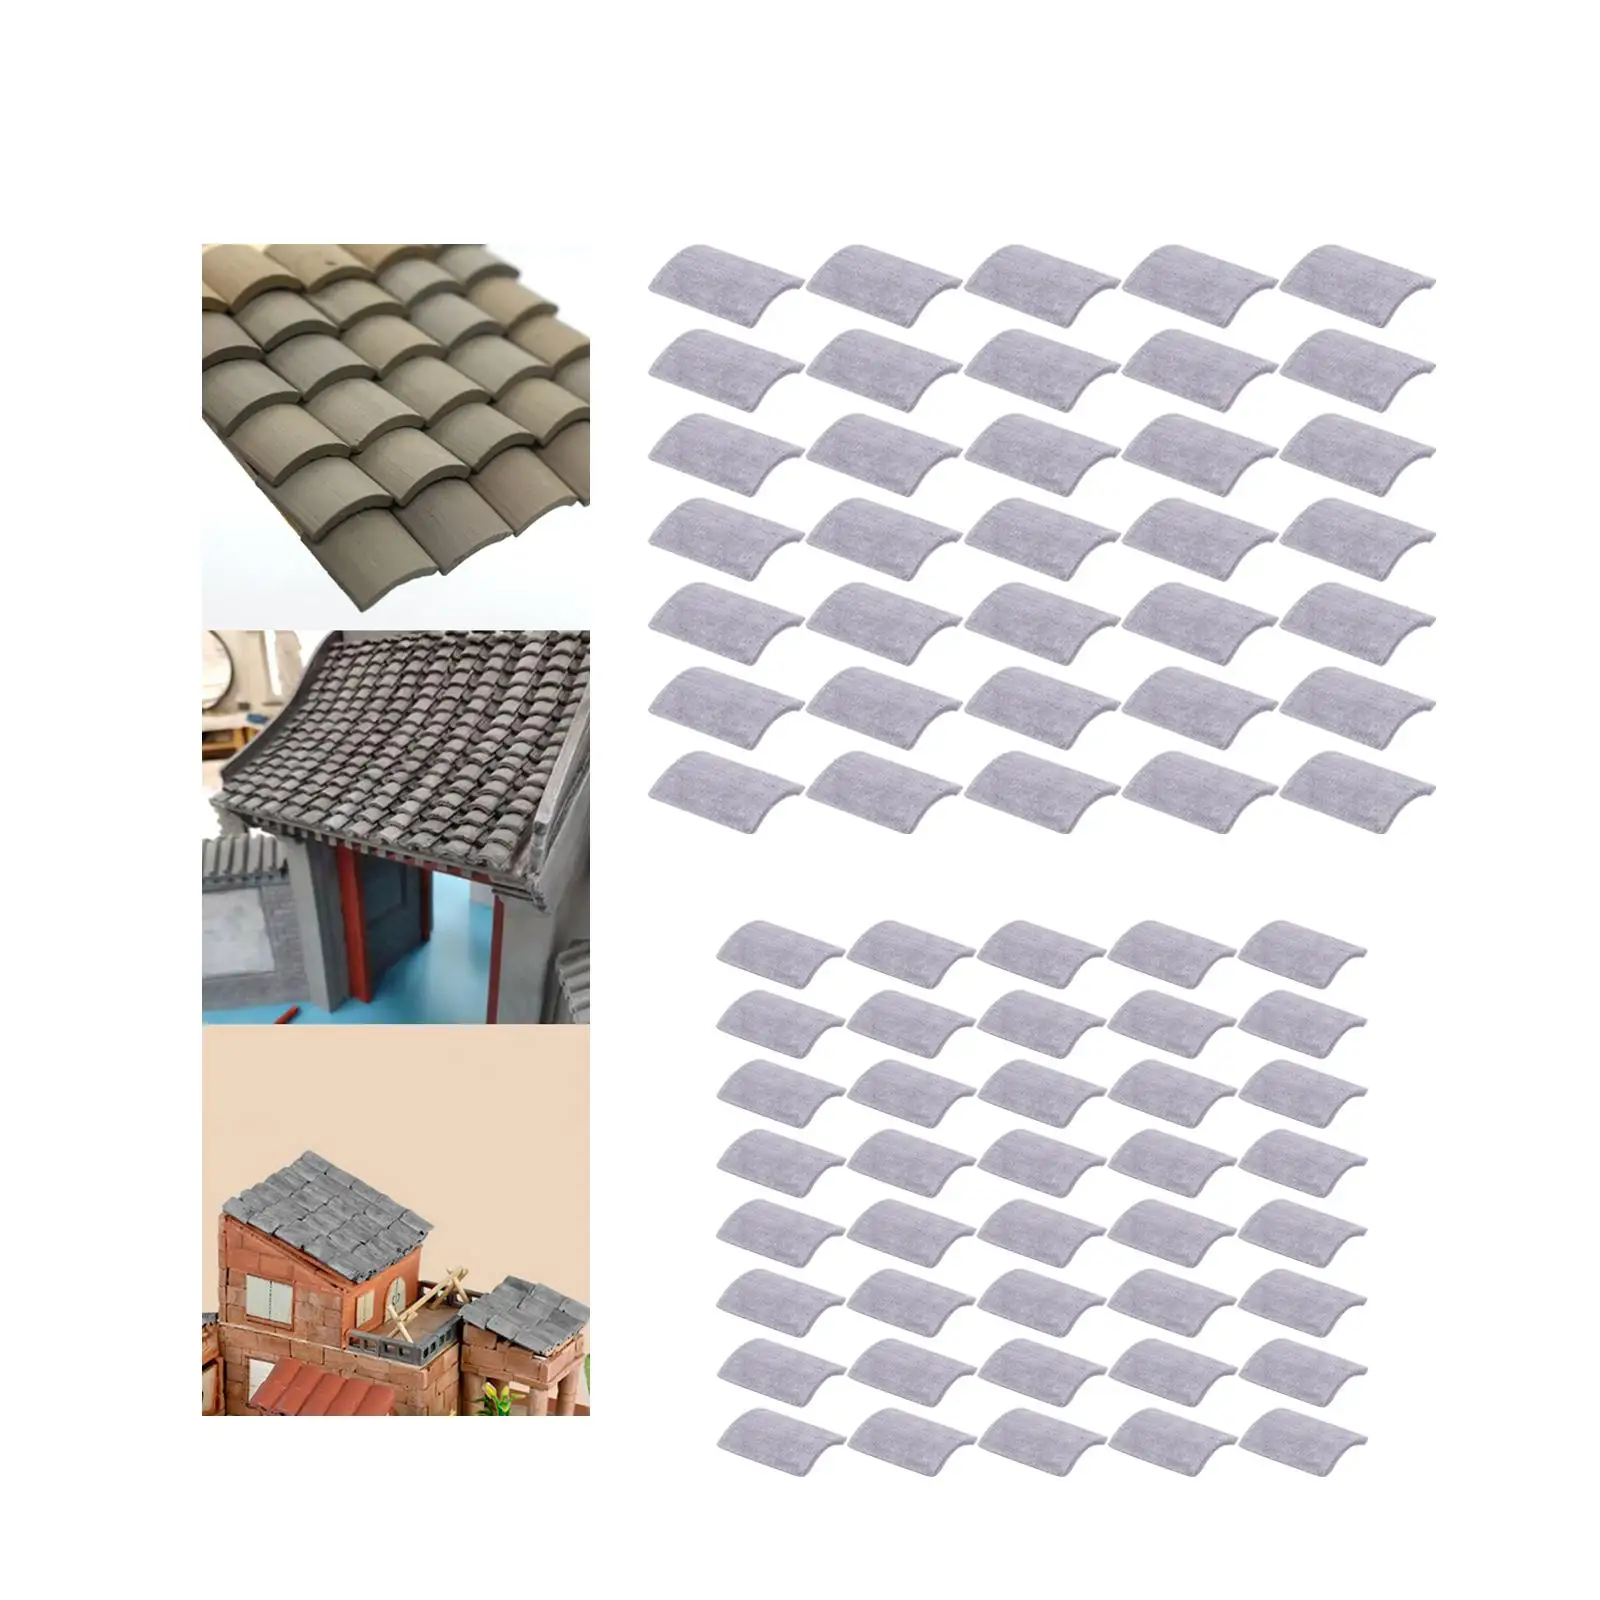 Grey Roof Tiles Decor 1:16 Miniature Tiles Figurine Landscaping Accessories Grey Wall Bricks for Dollhouses Living Room Toys